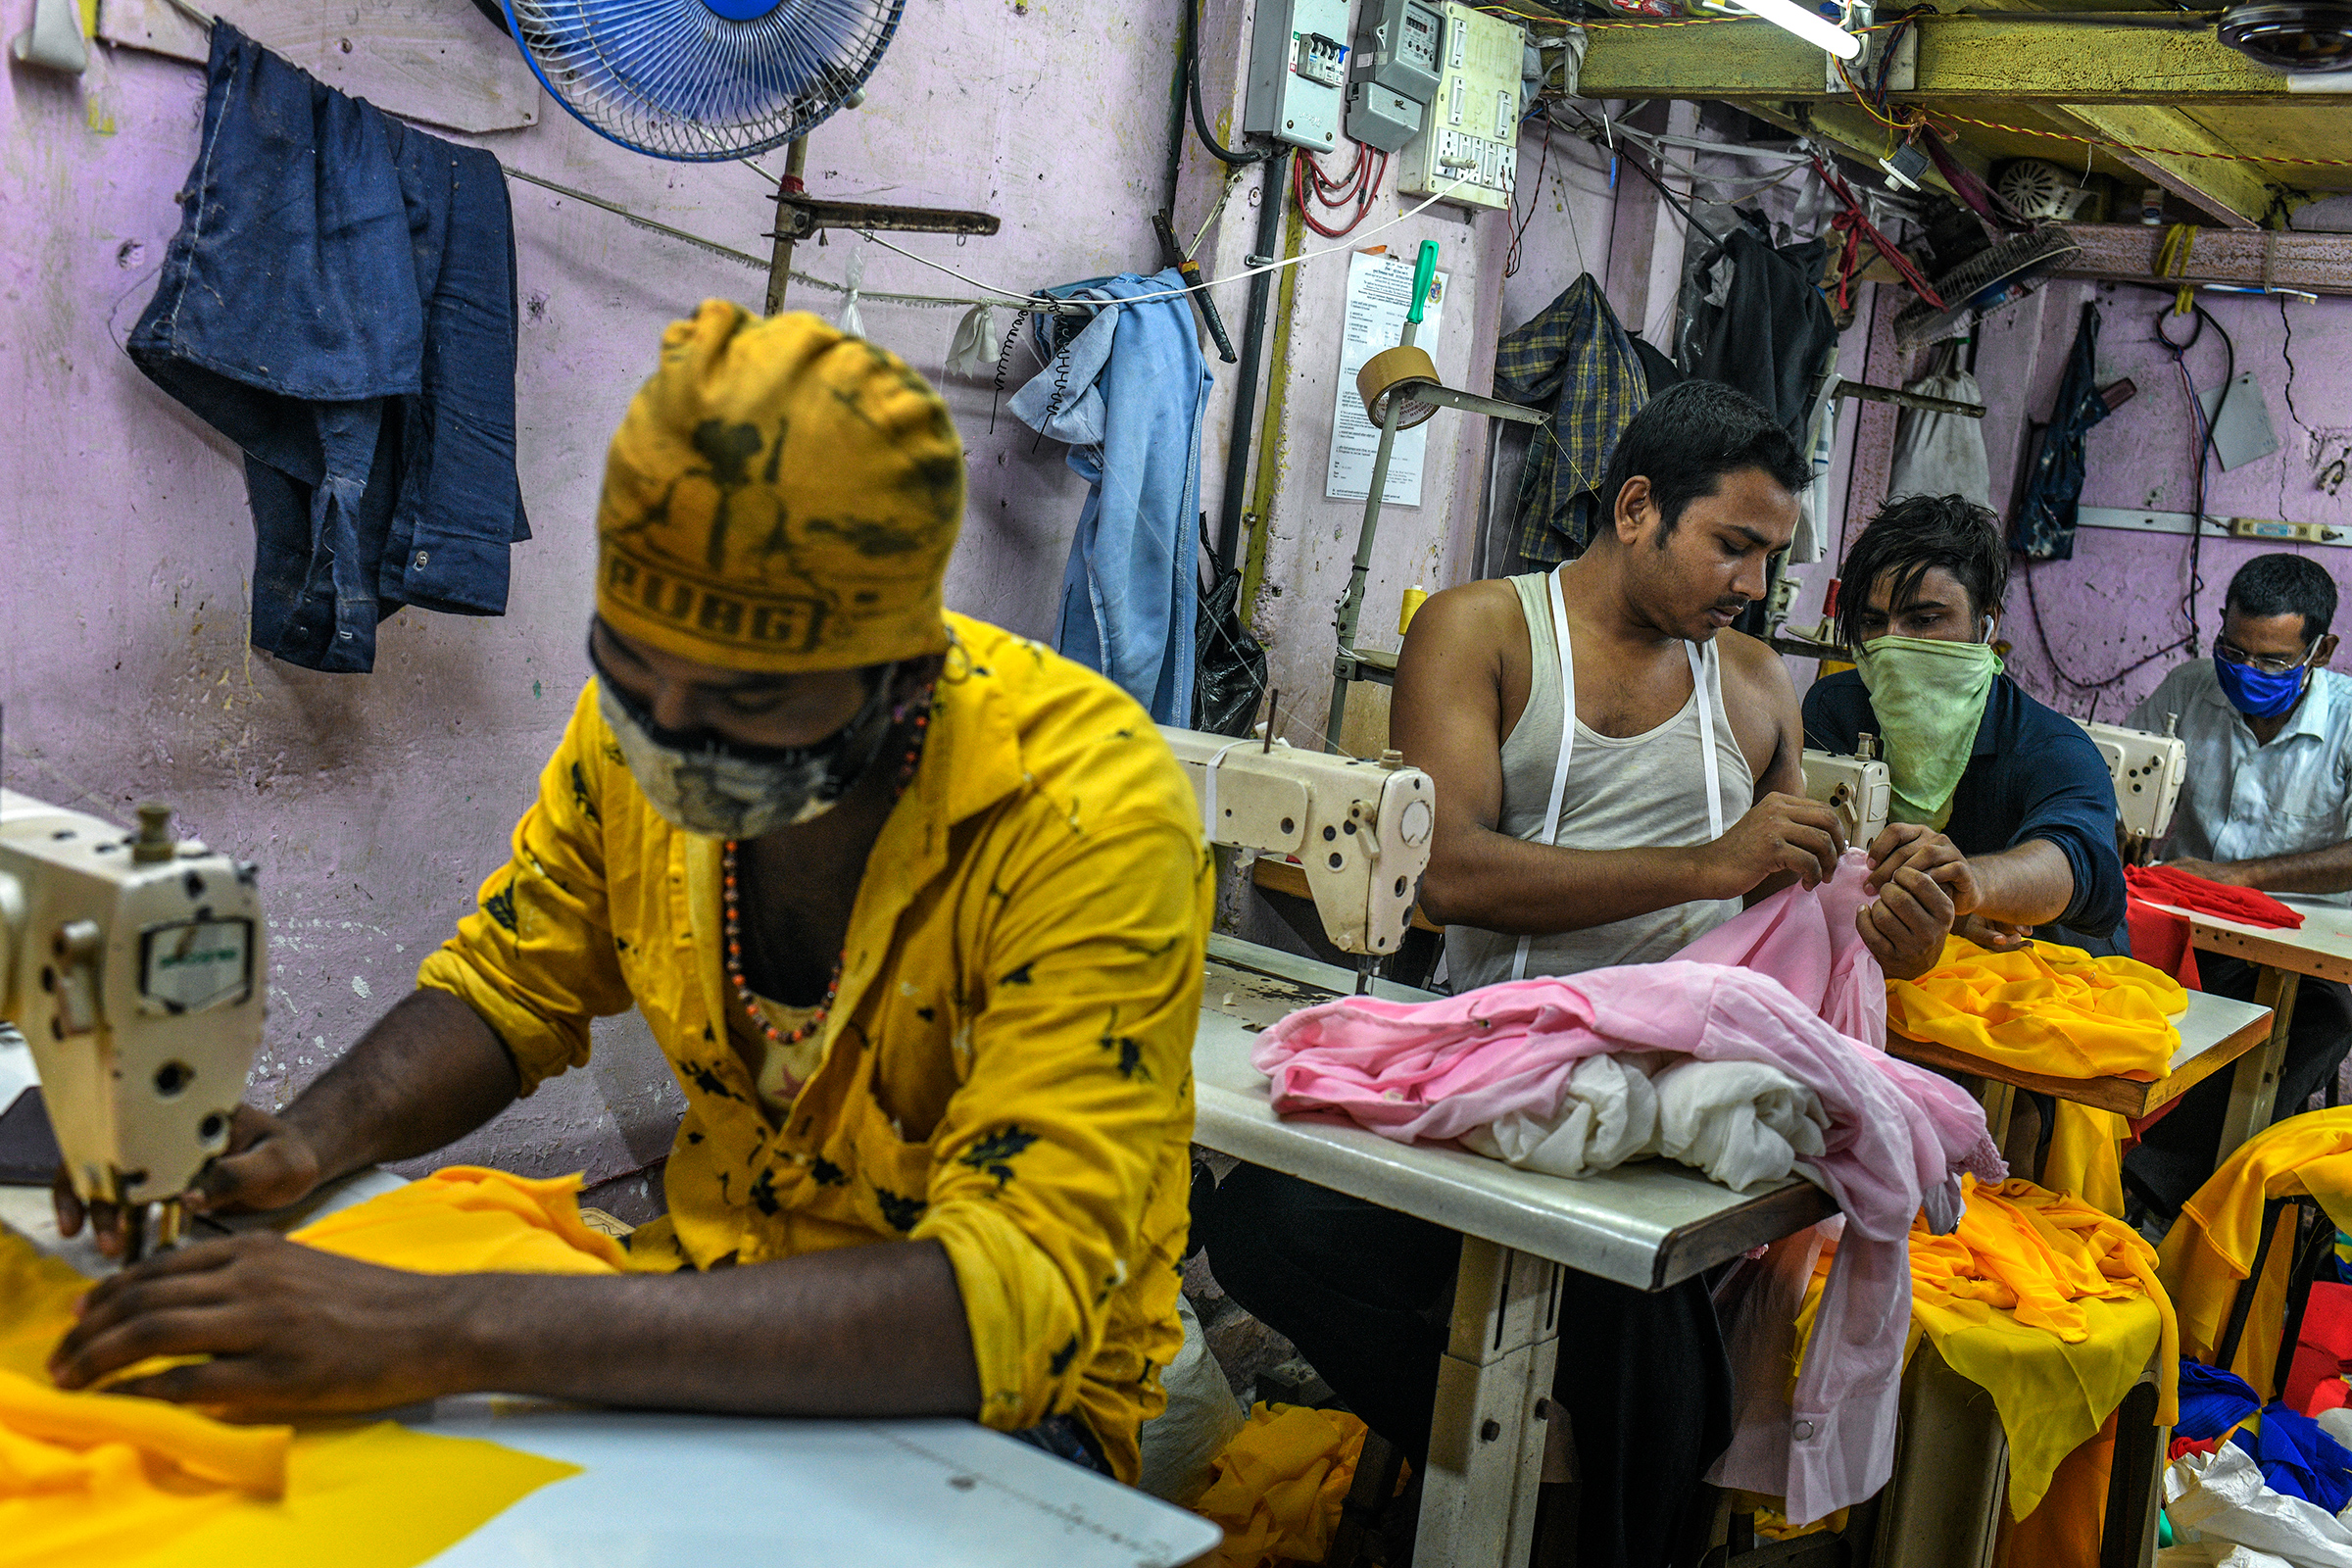 "My family was worried about the disease and didn’t want me to return to the city, but I had to come back to work," said Ishrar Ali, who stitches women's tops in a garment workshop in Dharavi.